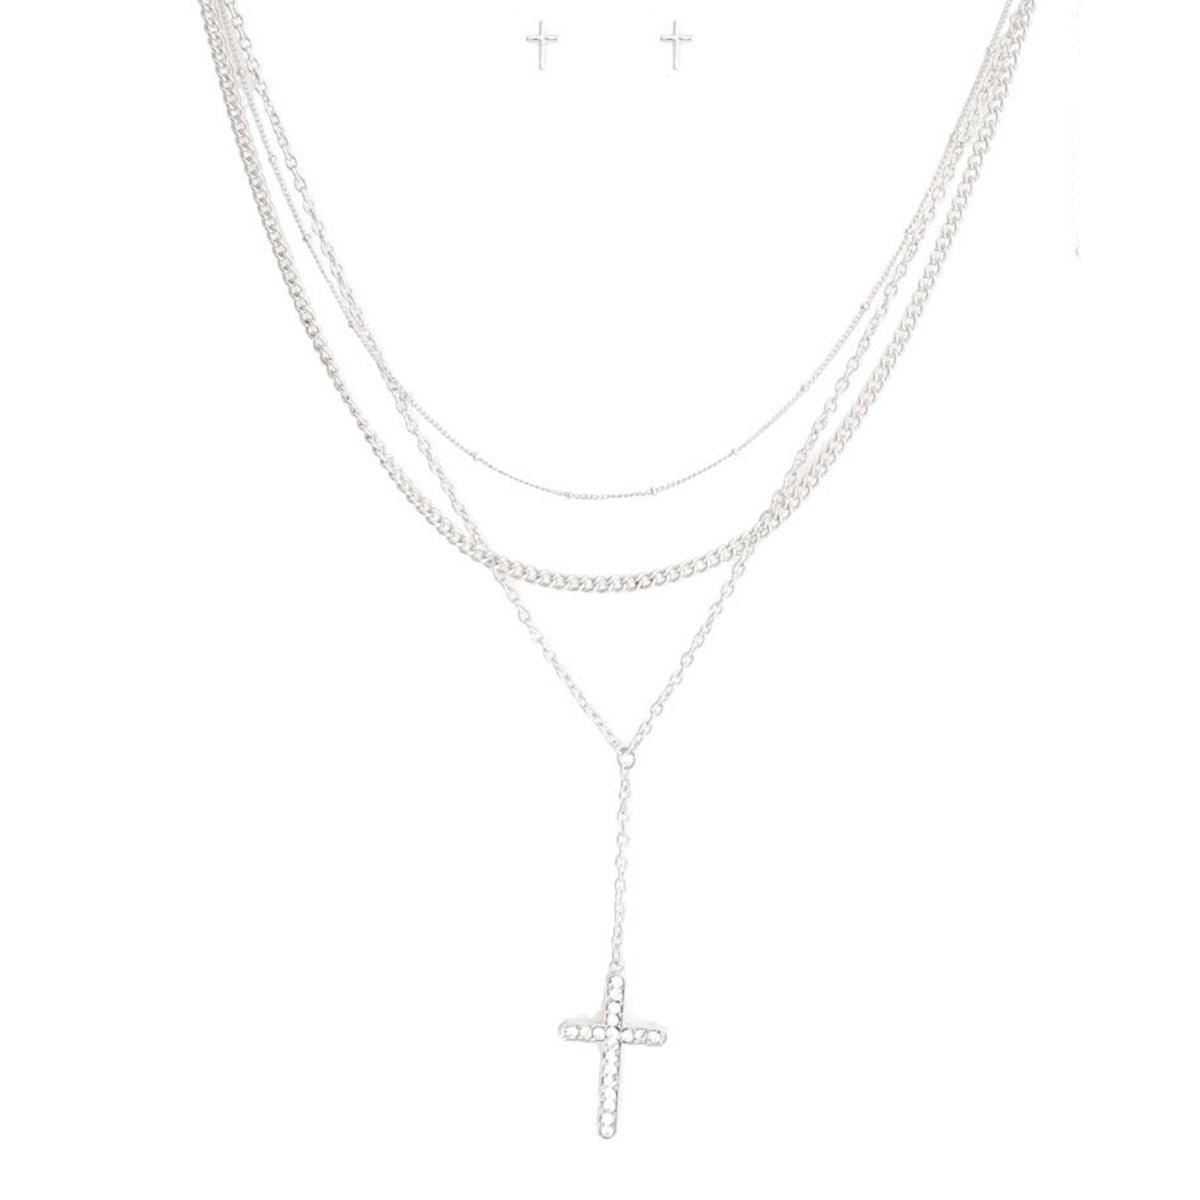 Triple Chain Cross Necklace Set Silver Plated